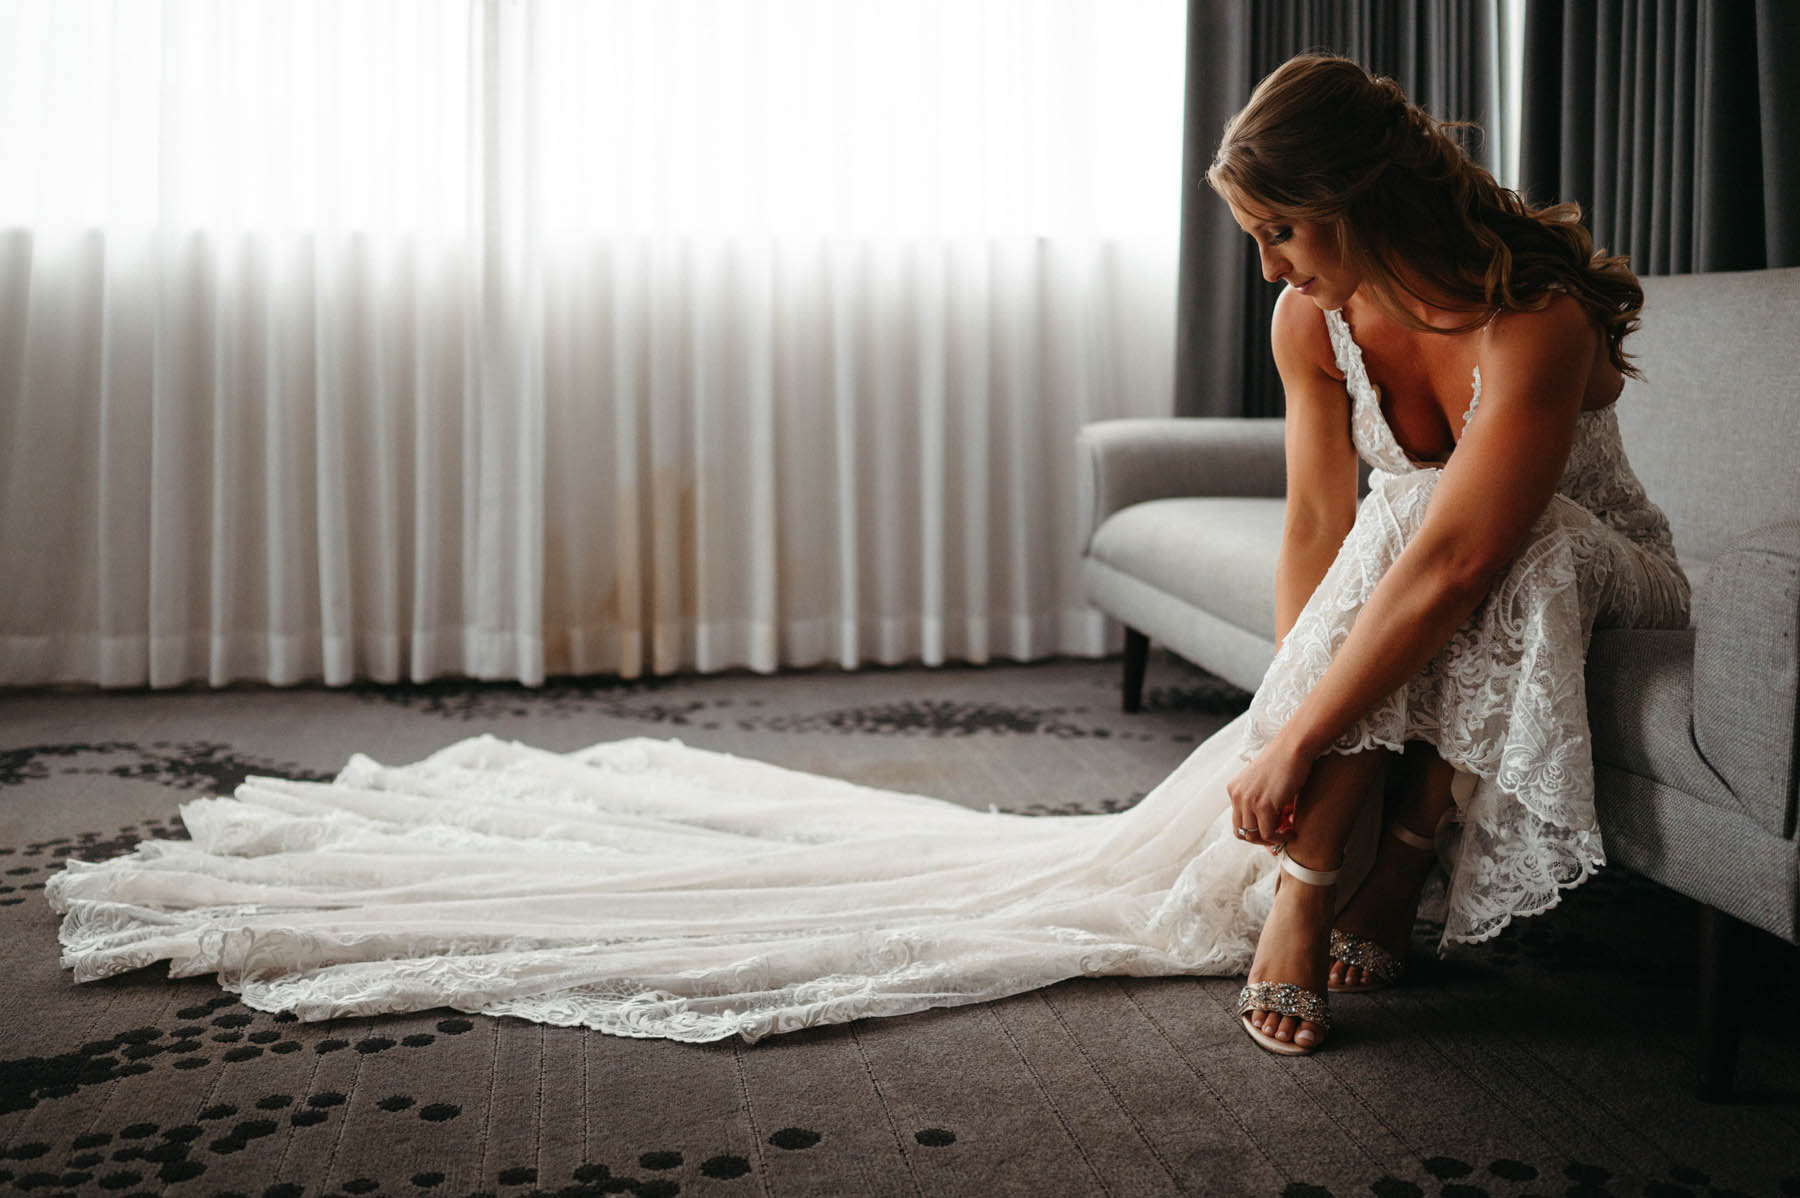 One of the brides poses as she buckles her shoe.